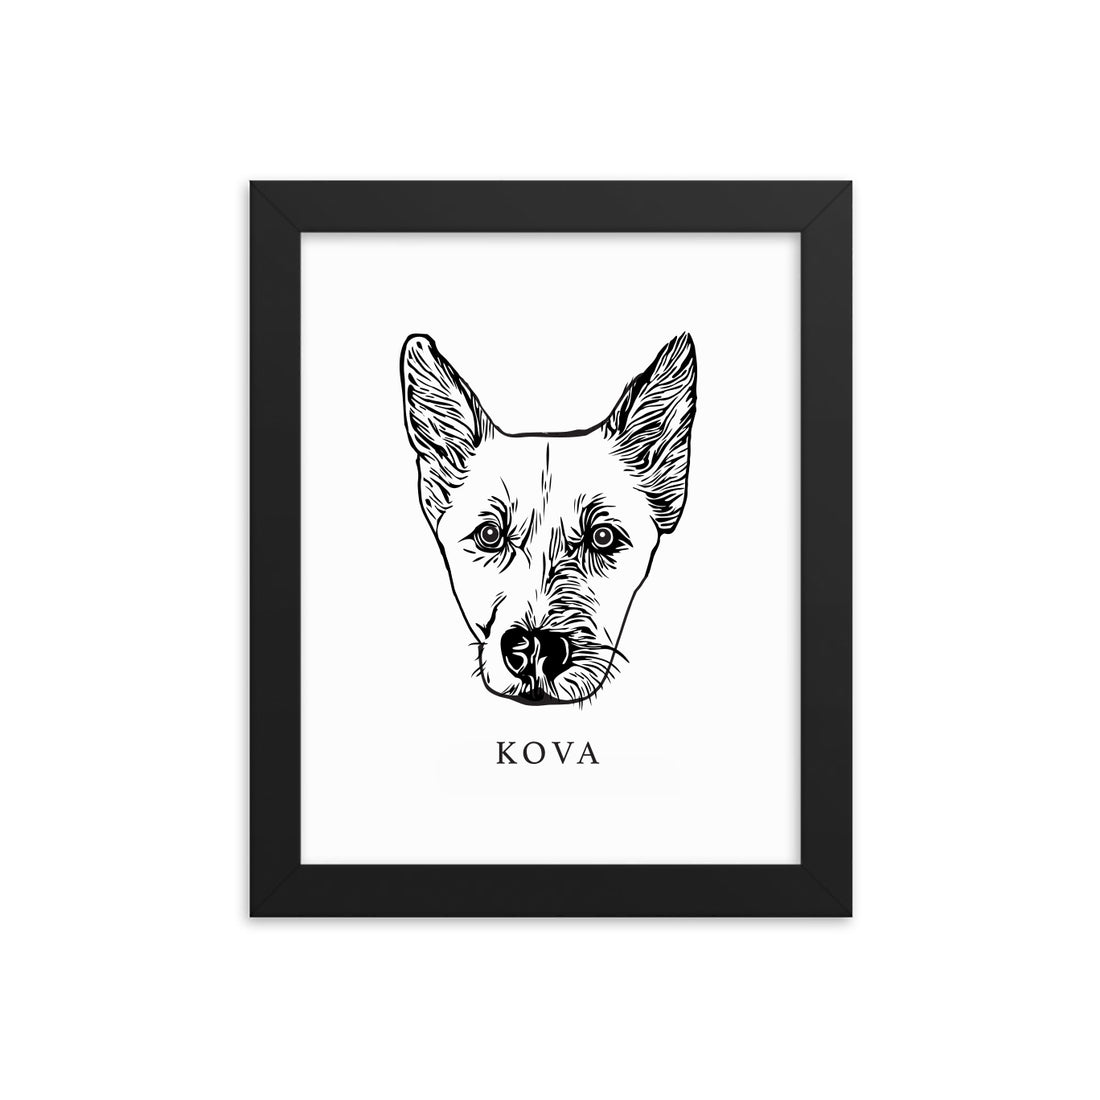 Custom Pet Portrait Framed from Photo | Wagged Tails 